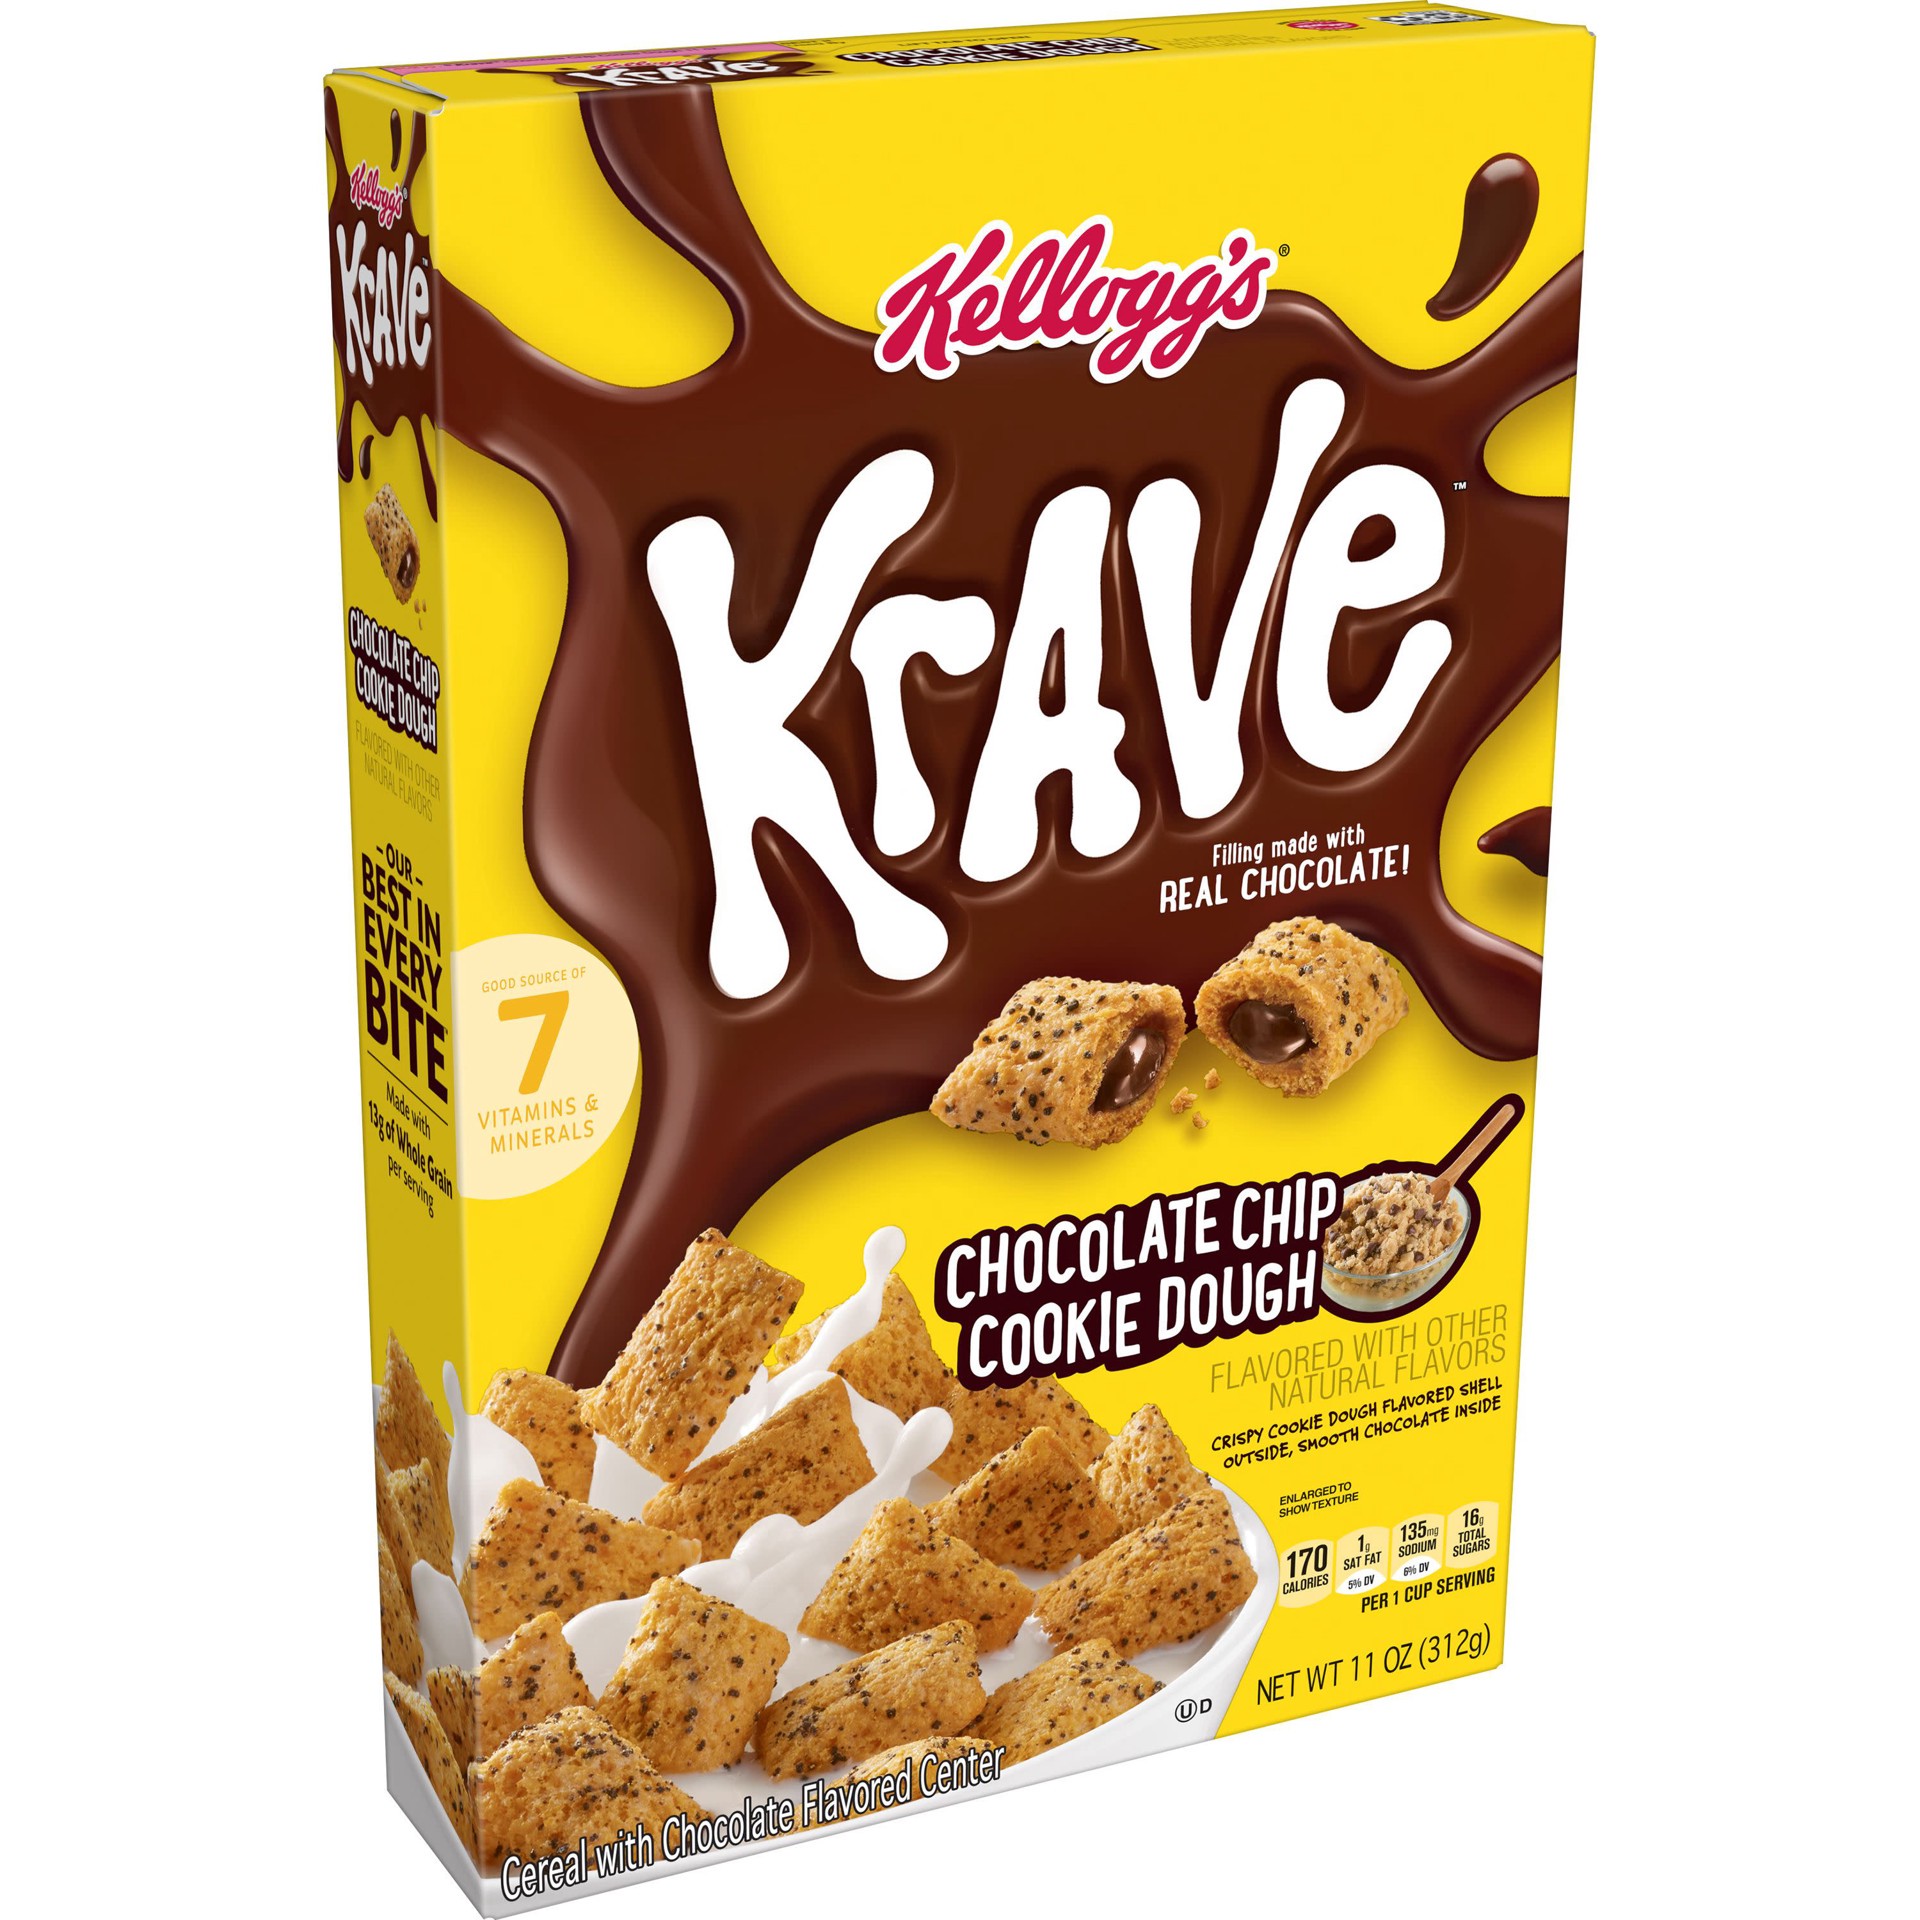 slide 1 of 5, Krave Kellogg's Krave Breakfast Cereal, 7 Vitamins and Minerals, Kids Snacks, Chocolate Chip Cookie Dough, 11oz Box, 1 Box, 11 oz